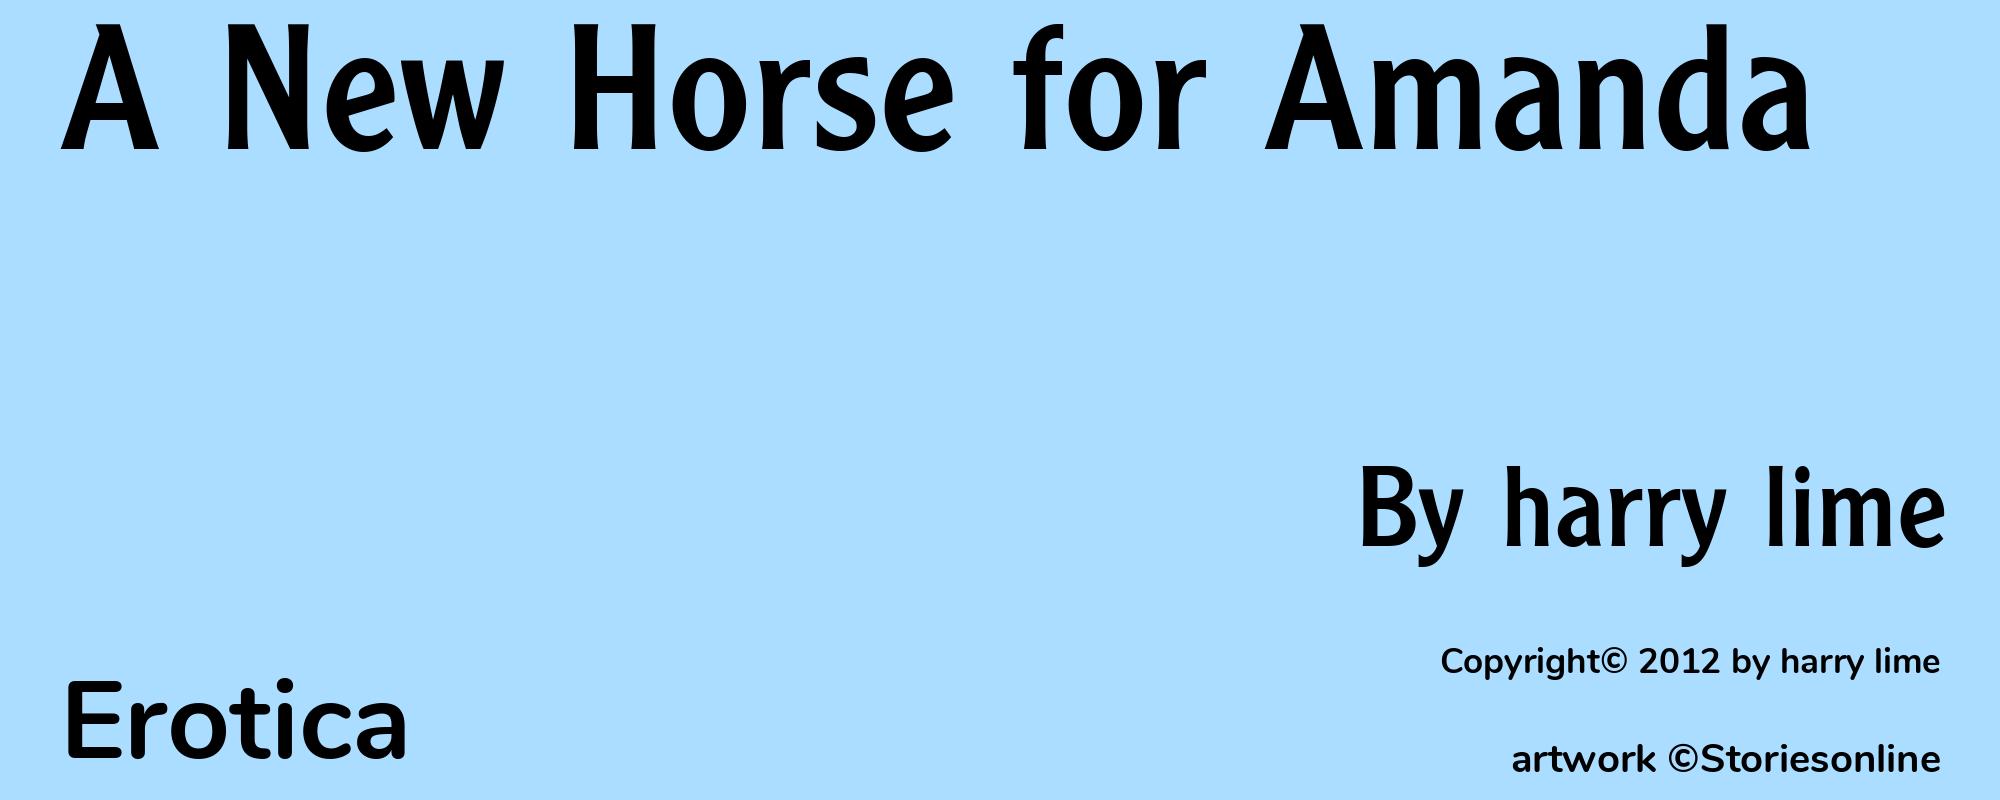 A New Horse for Amanda - Cover